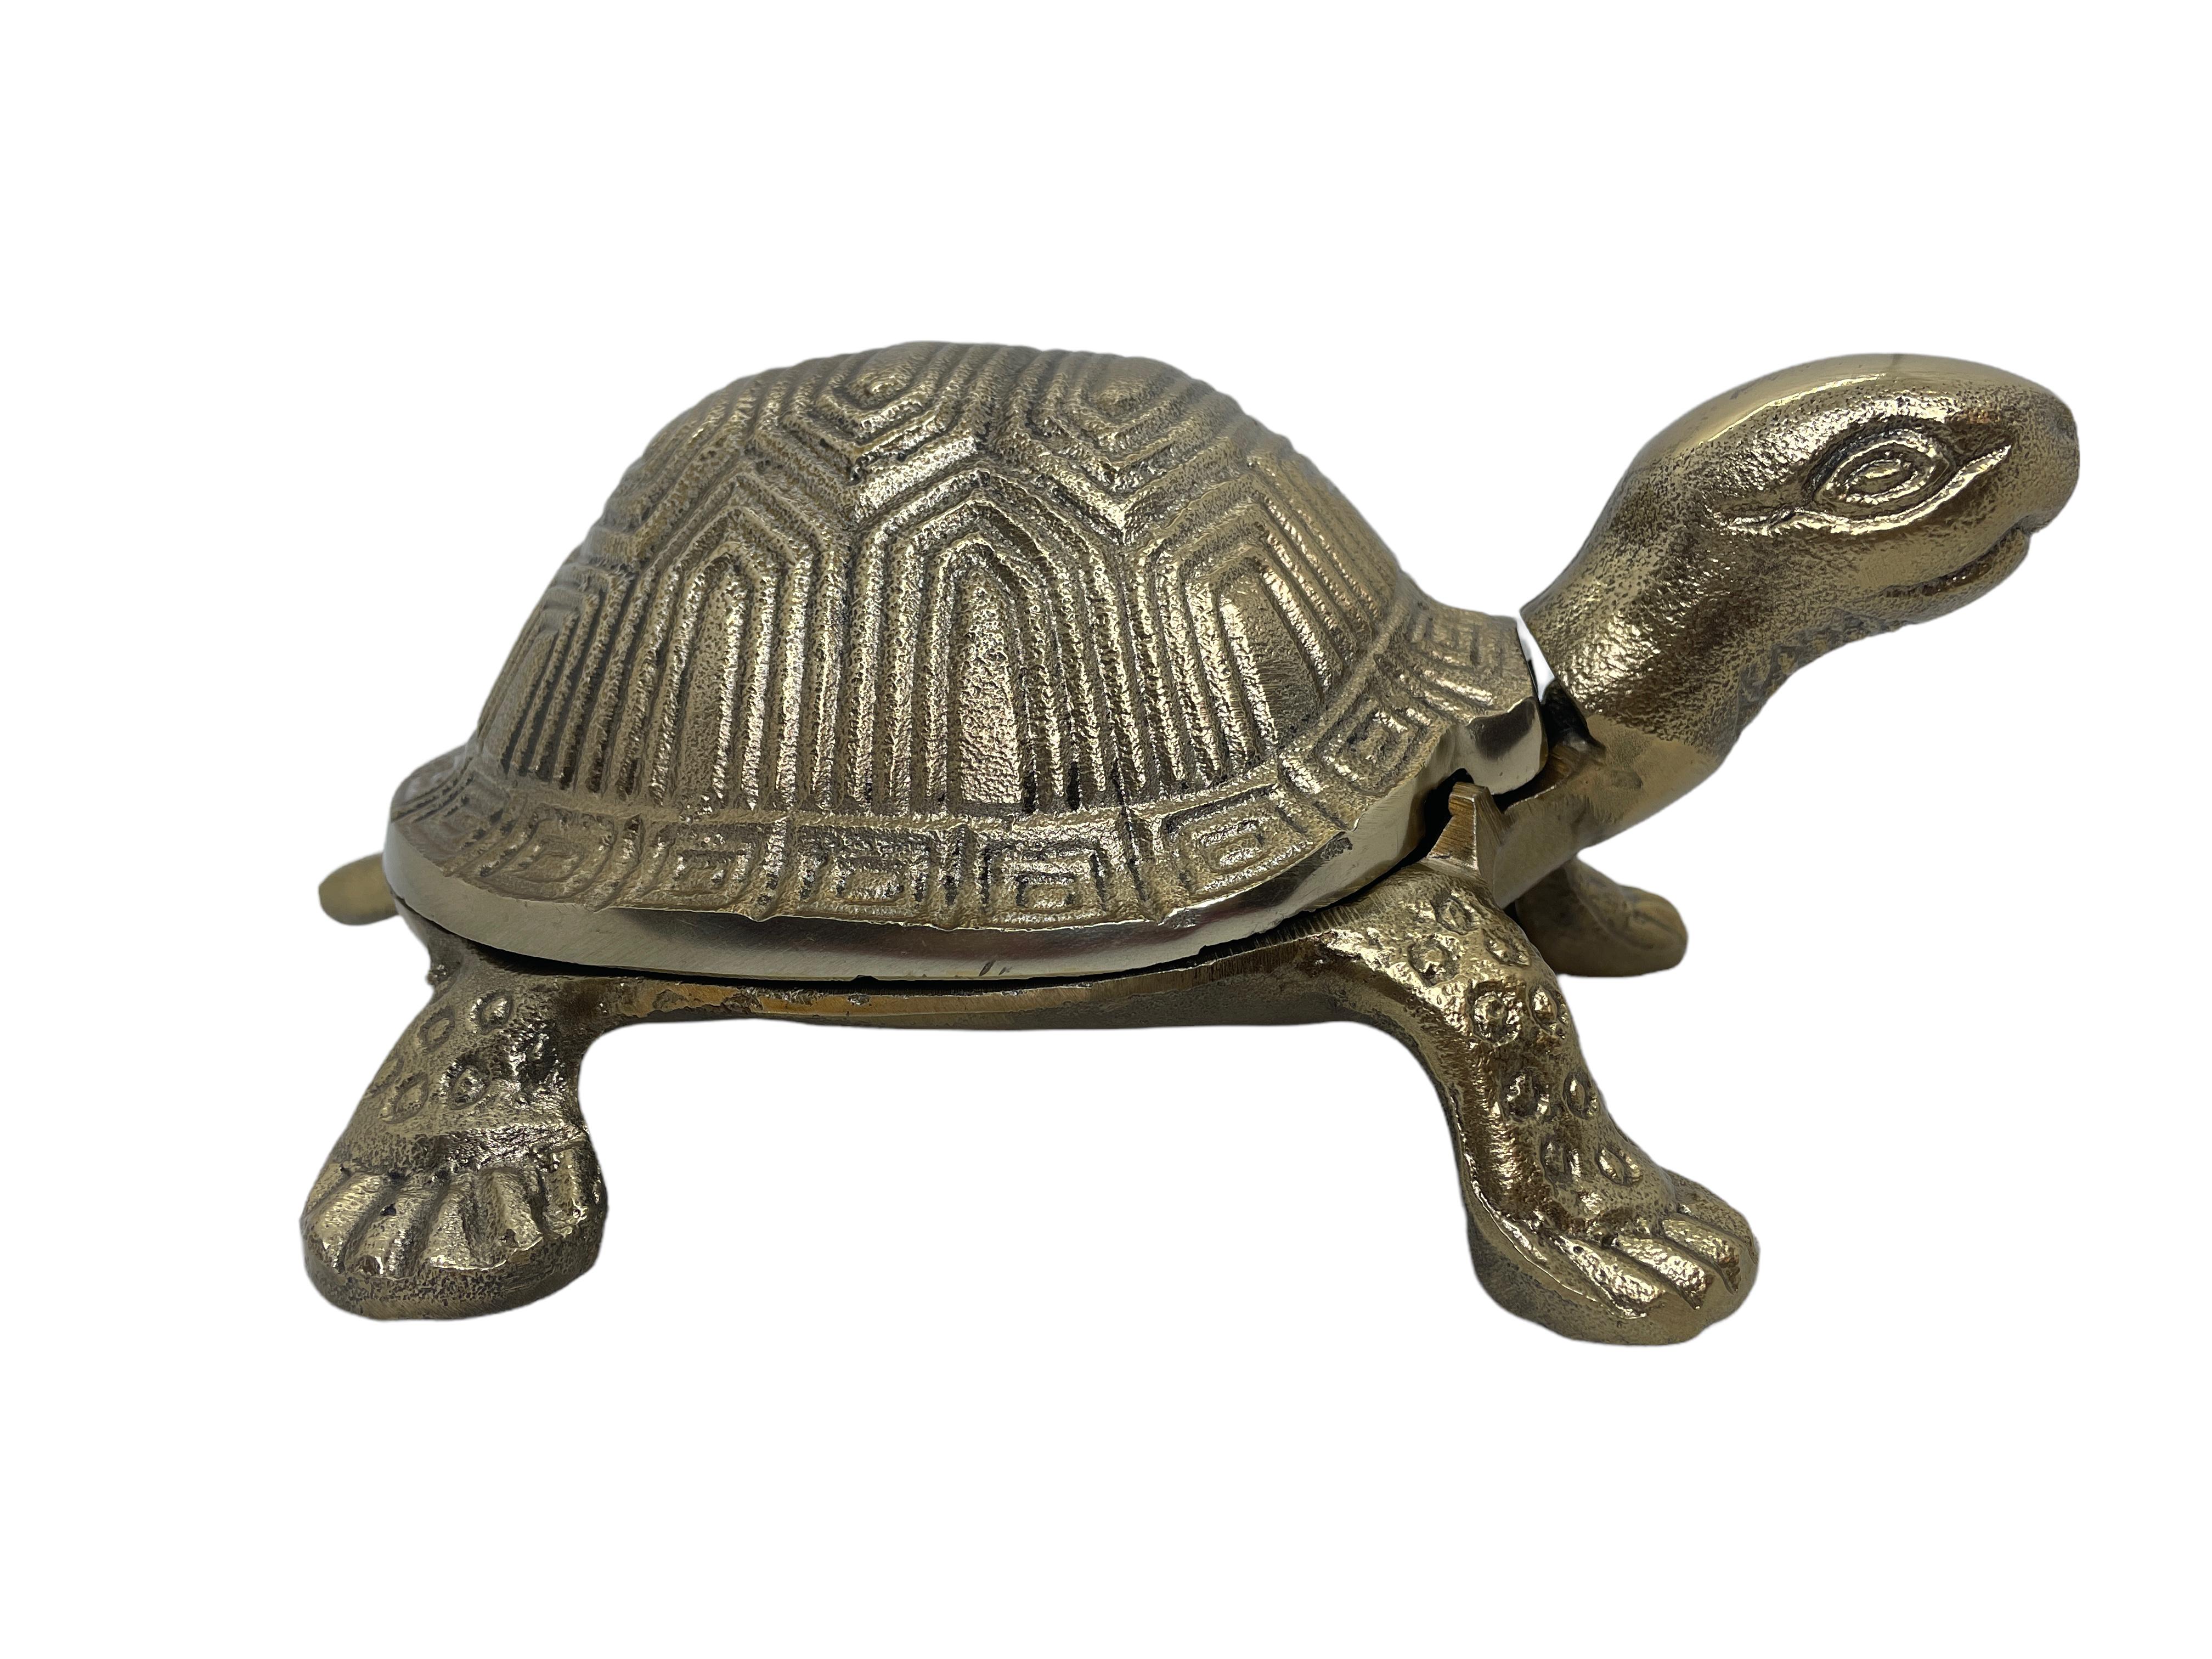 A vintage brass colored metal box in the shape of a turtle. Made probably in Austria. Beautiful detailing formed into the metal. The turtle's shell hinges open to access a shallow storage tray. Perfect for using as a jewelry box or to store office